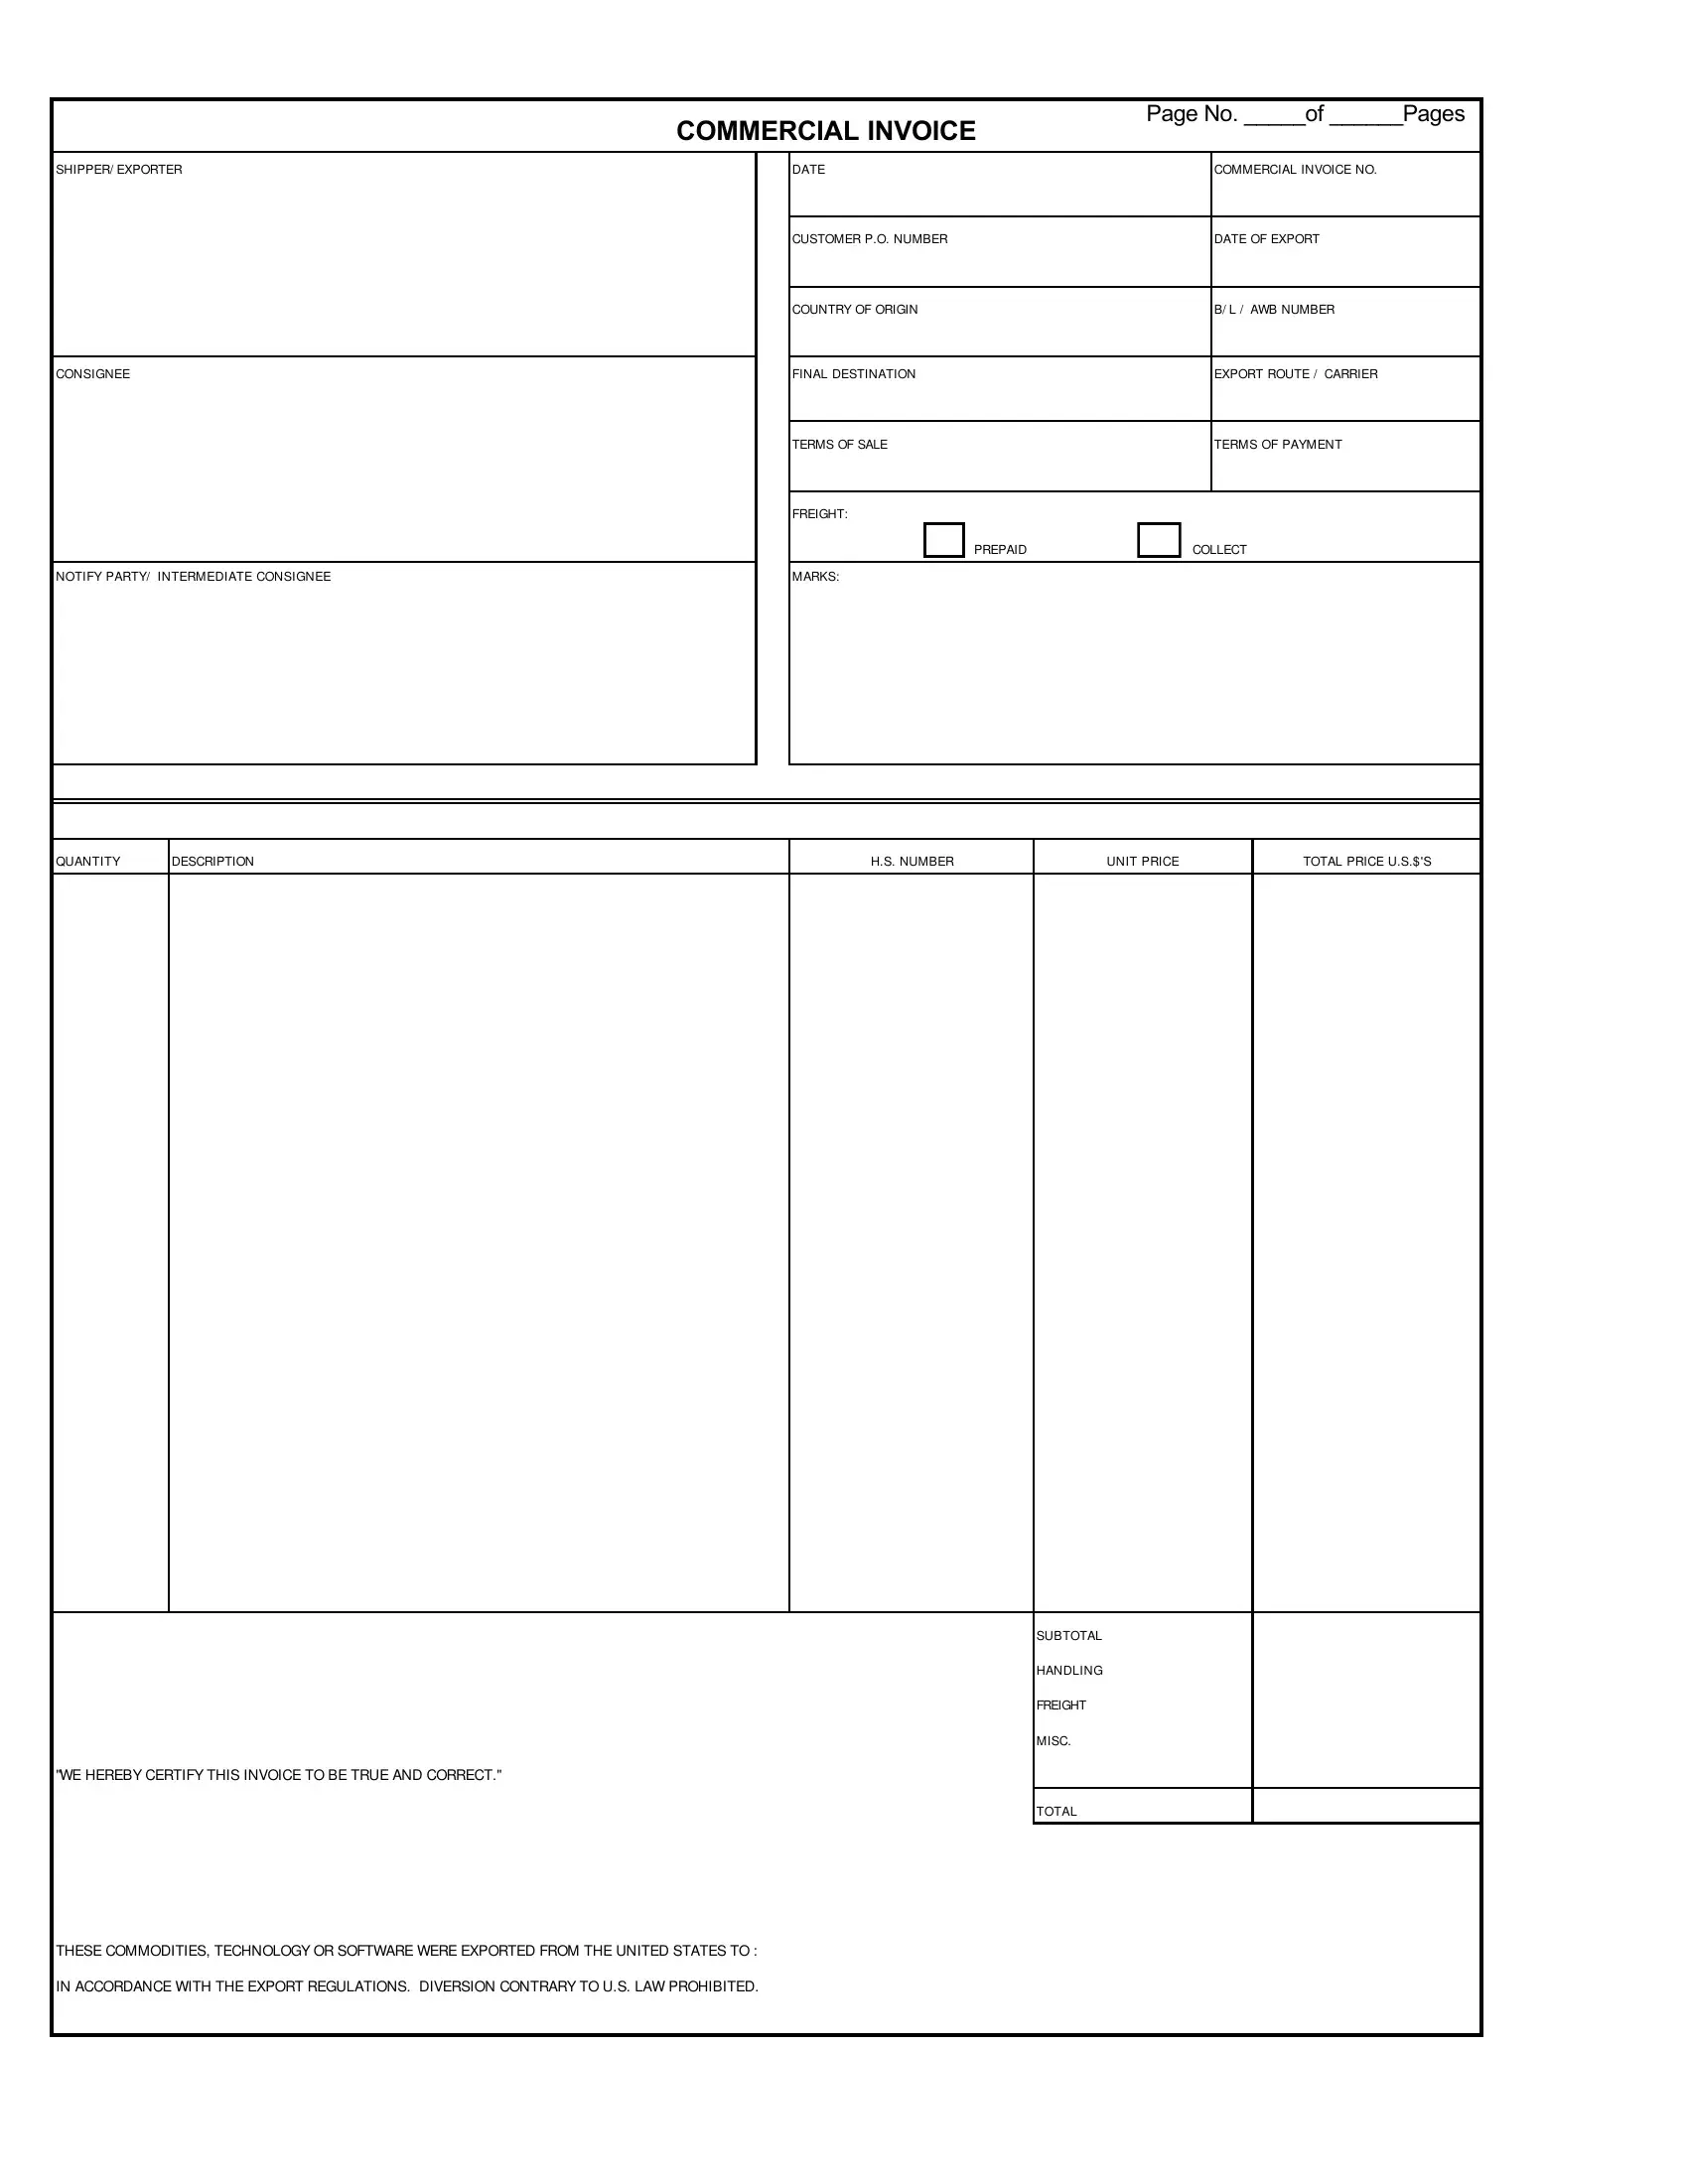 Commercial Invoice Blank Form Fill Out Printable Pdf Forms Online